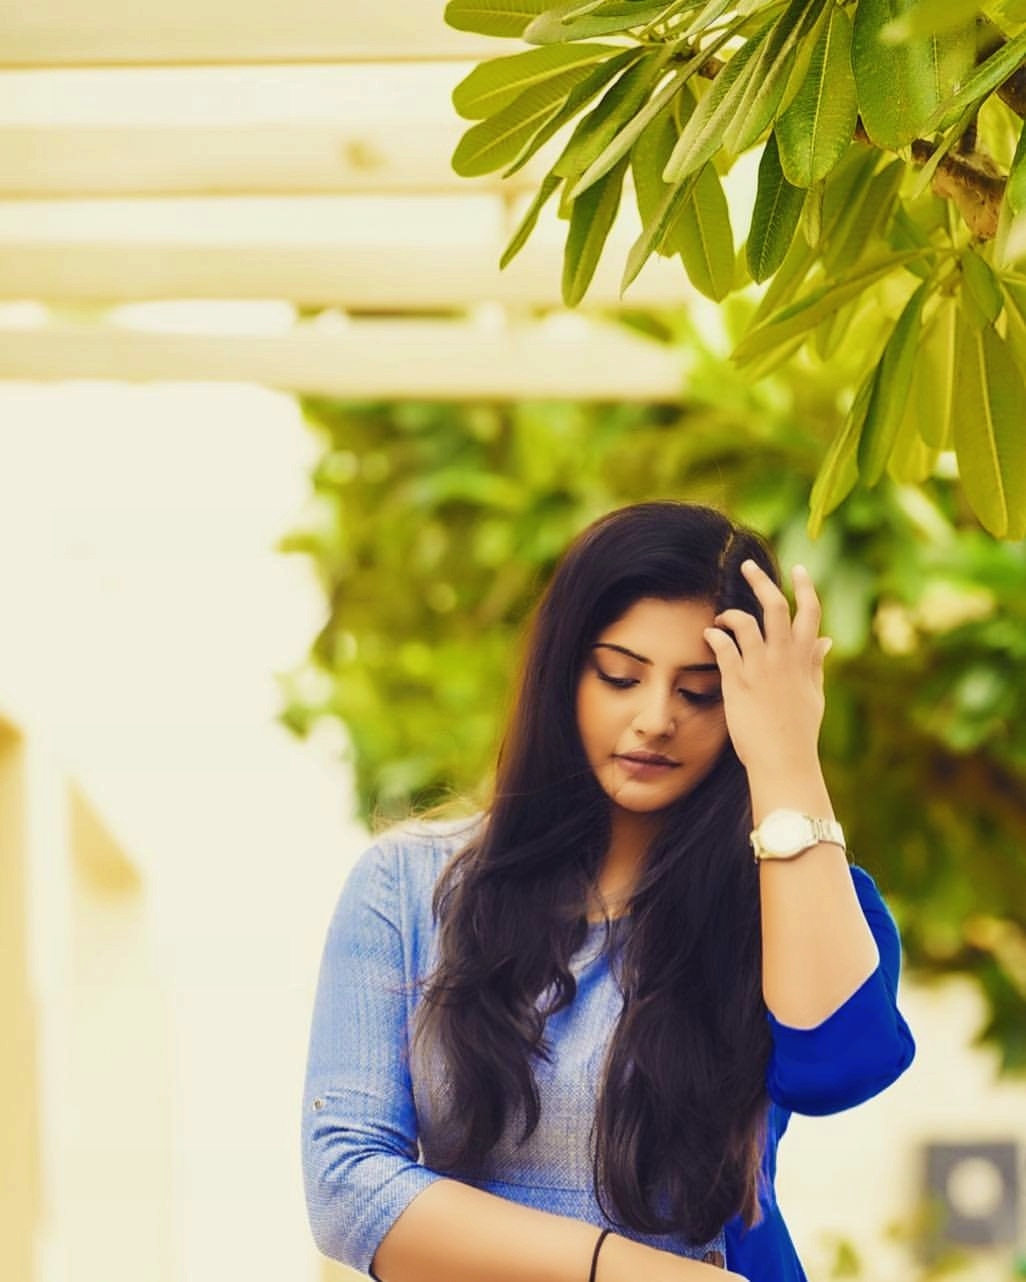 manjima-mohan-images-gallery-093-965